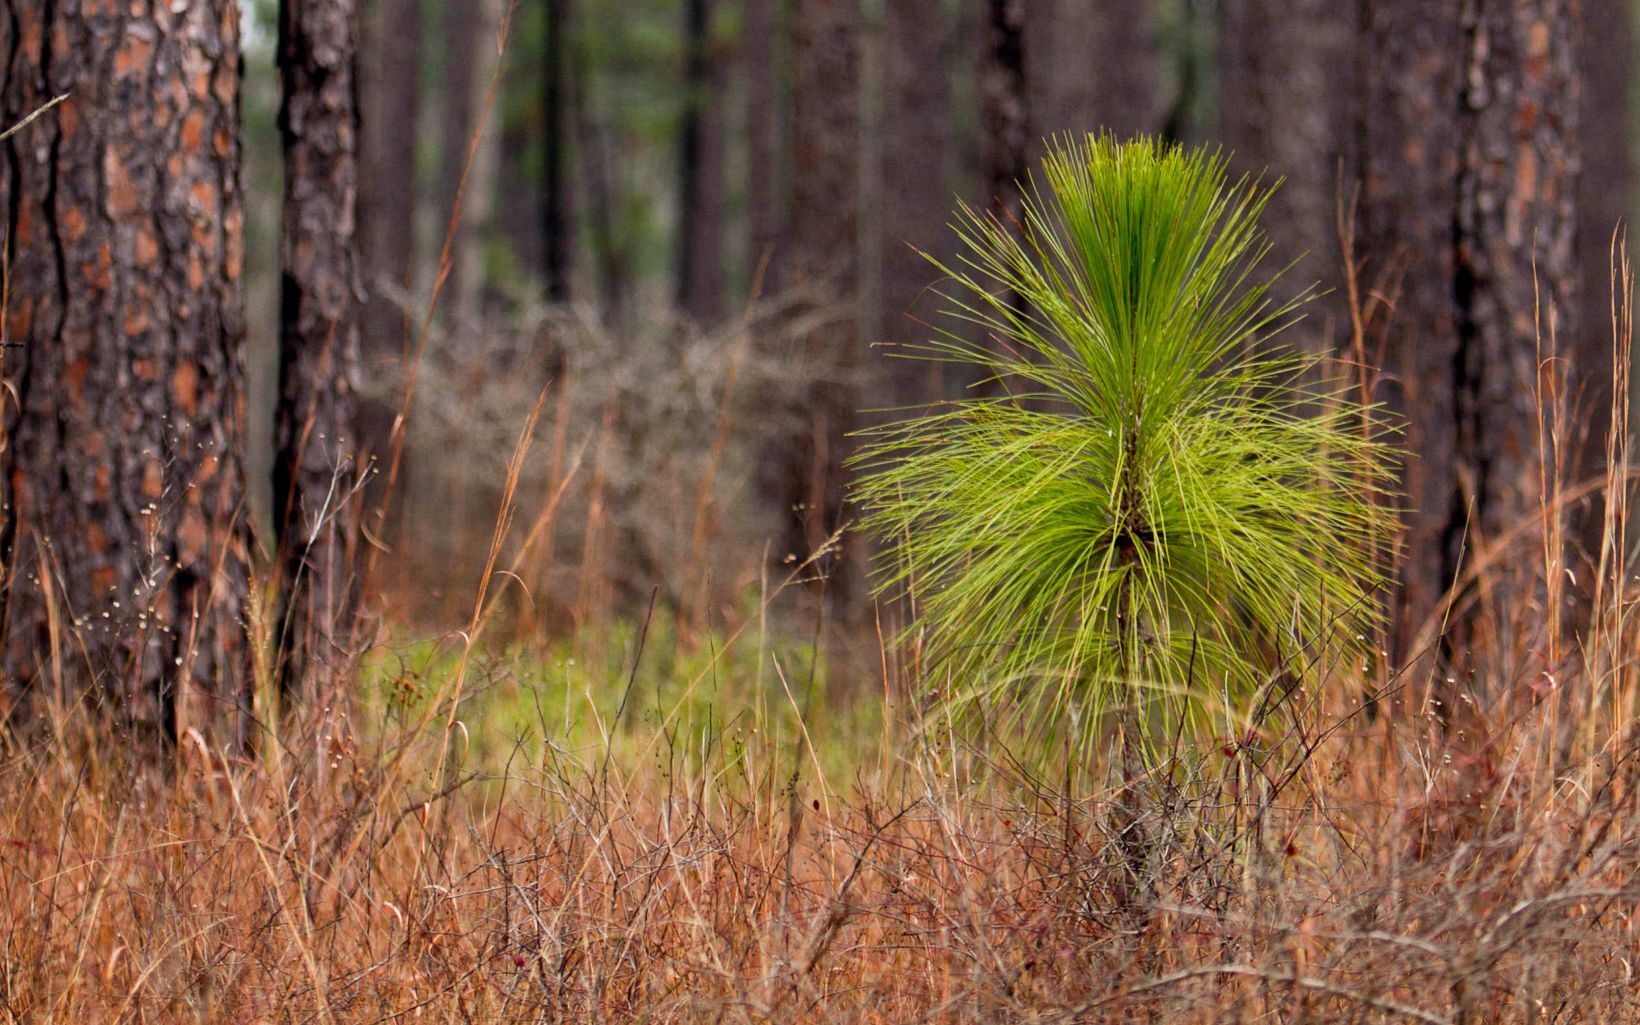 A longleaf seedling at the bottle brush stage in the middle of a mature forest. The bushy top of the seedling resembles a brush.